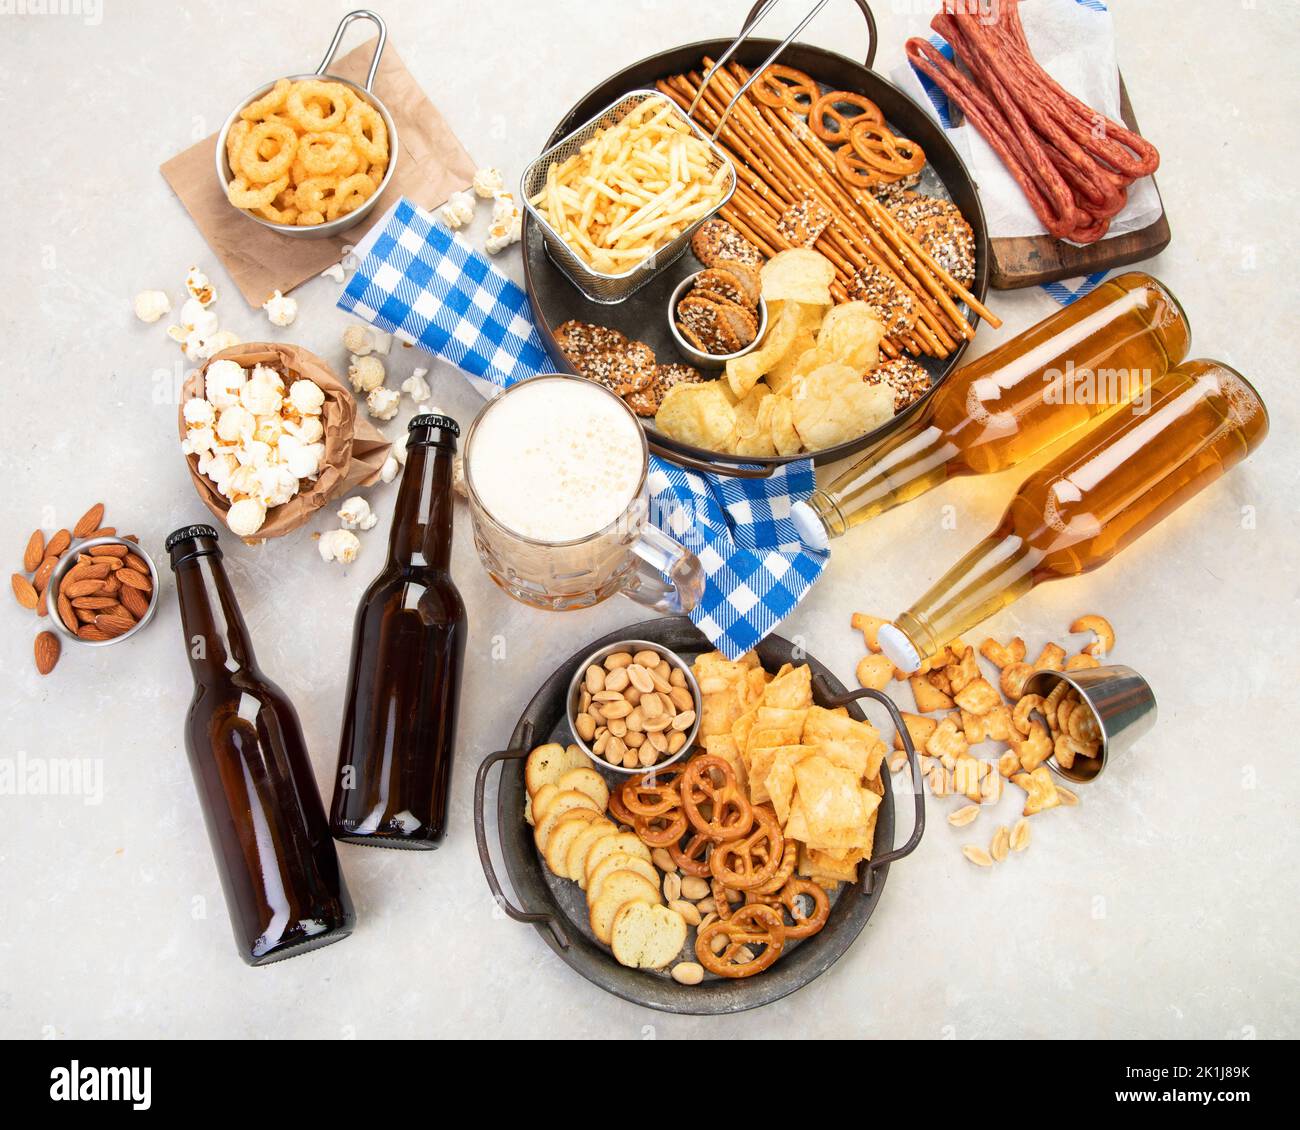 Assortment of beer and salty snacks on light background. Party food concept. Top view, copy space Stock Photo